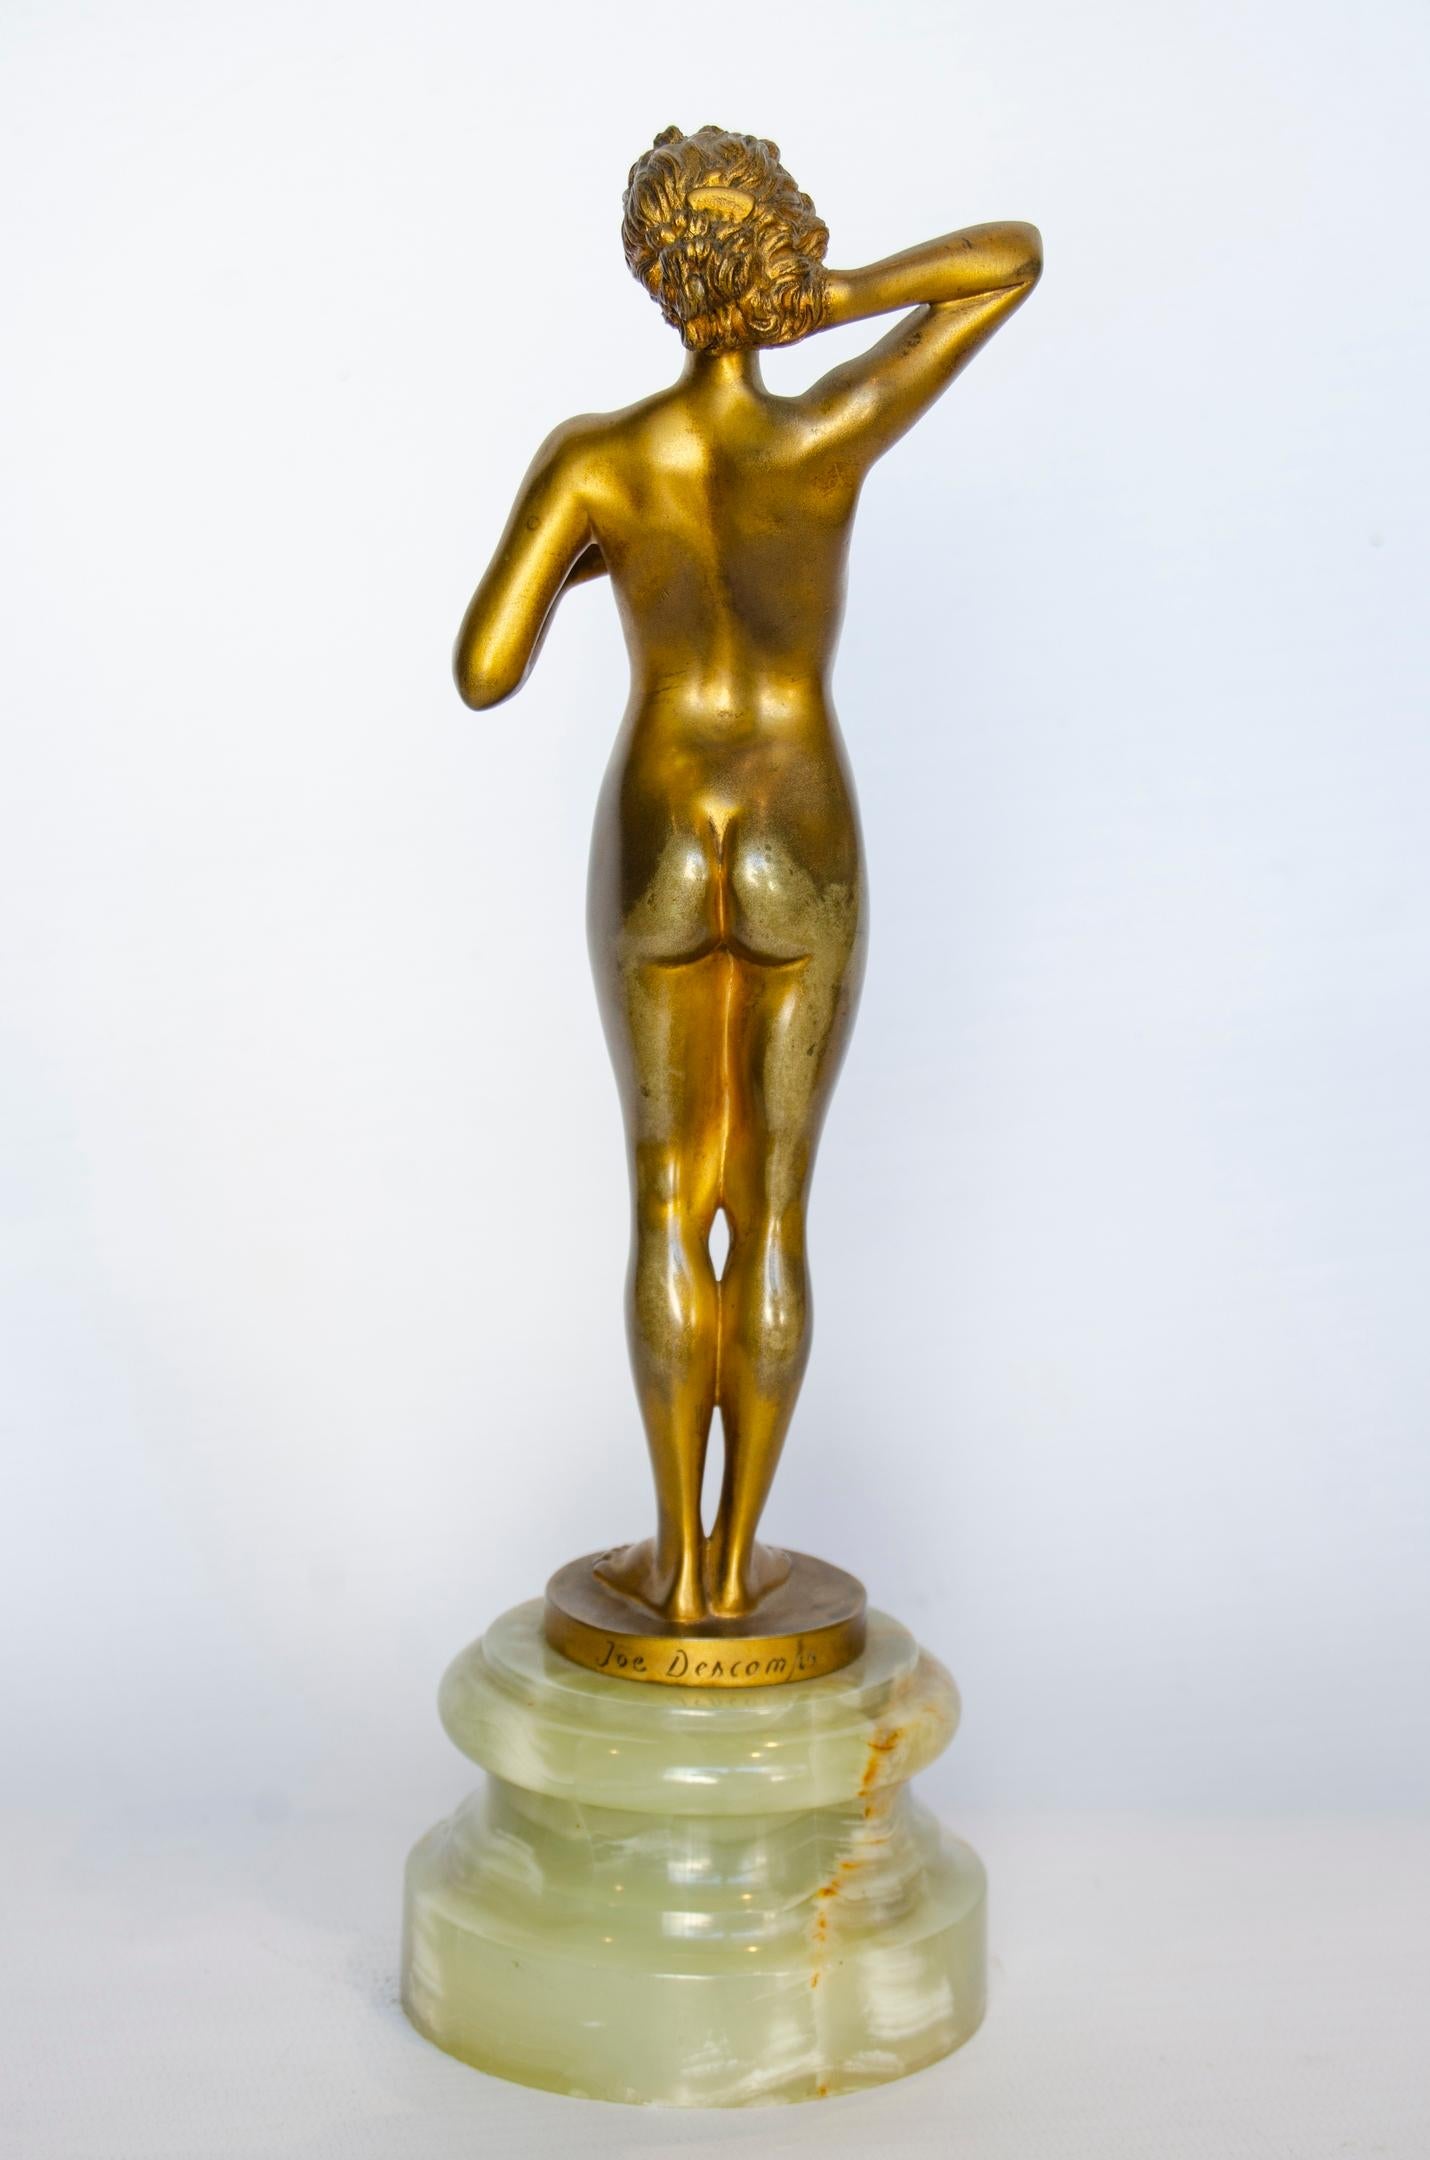 Nude fem sculpture (Descomps)
gilt bronze and onyx material
perfect condition with natural wear
Art Deco, 1920.